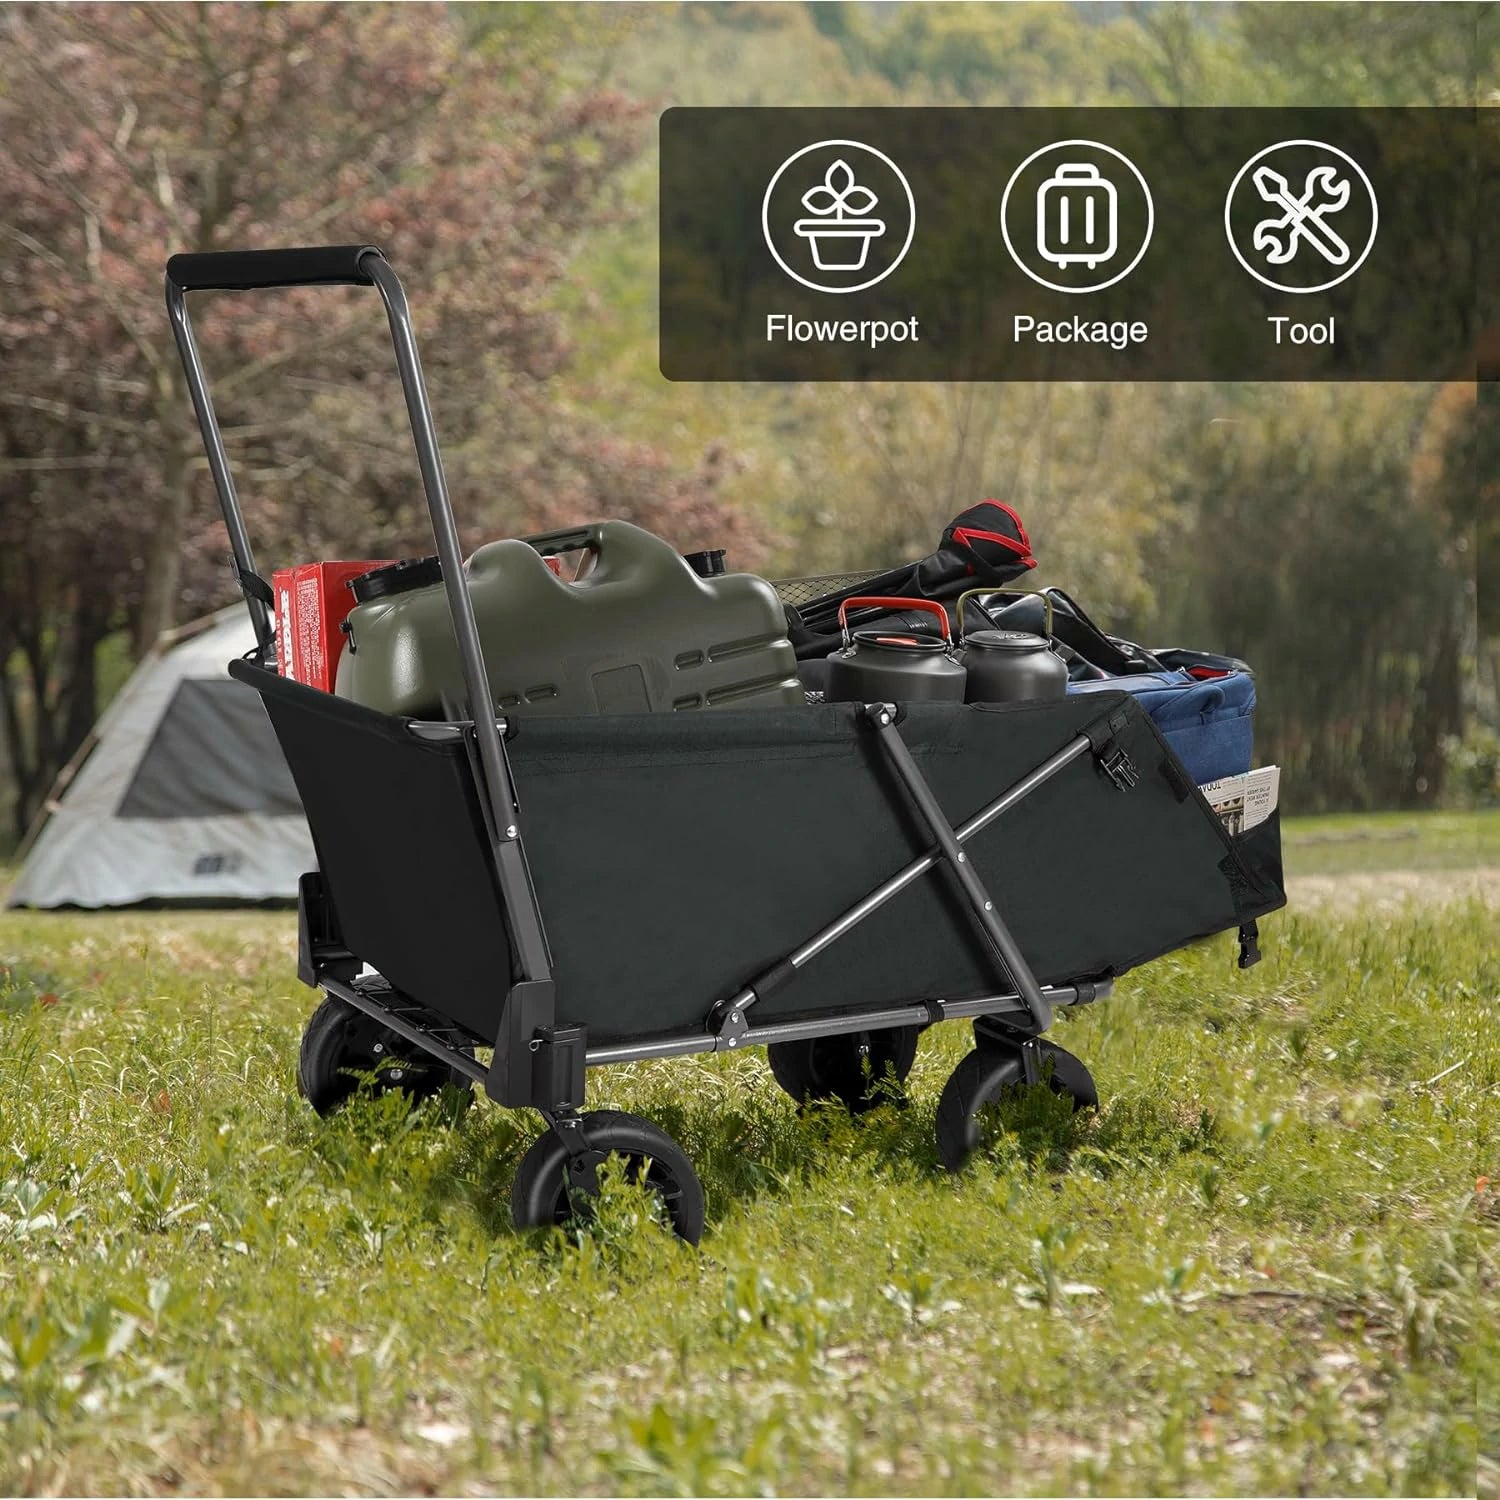 REDCAMP Folding Dog Wagon Cart with Extendable Rear End Heavy Duty